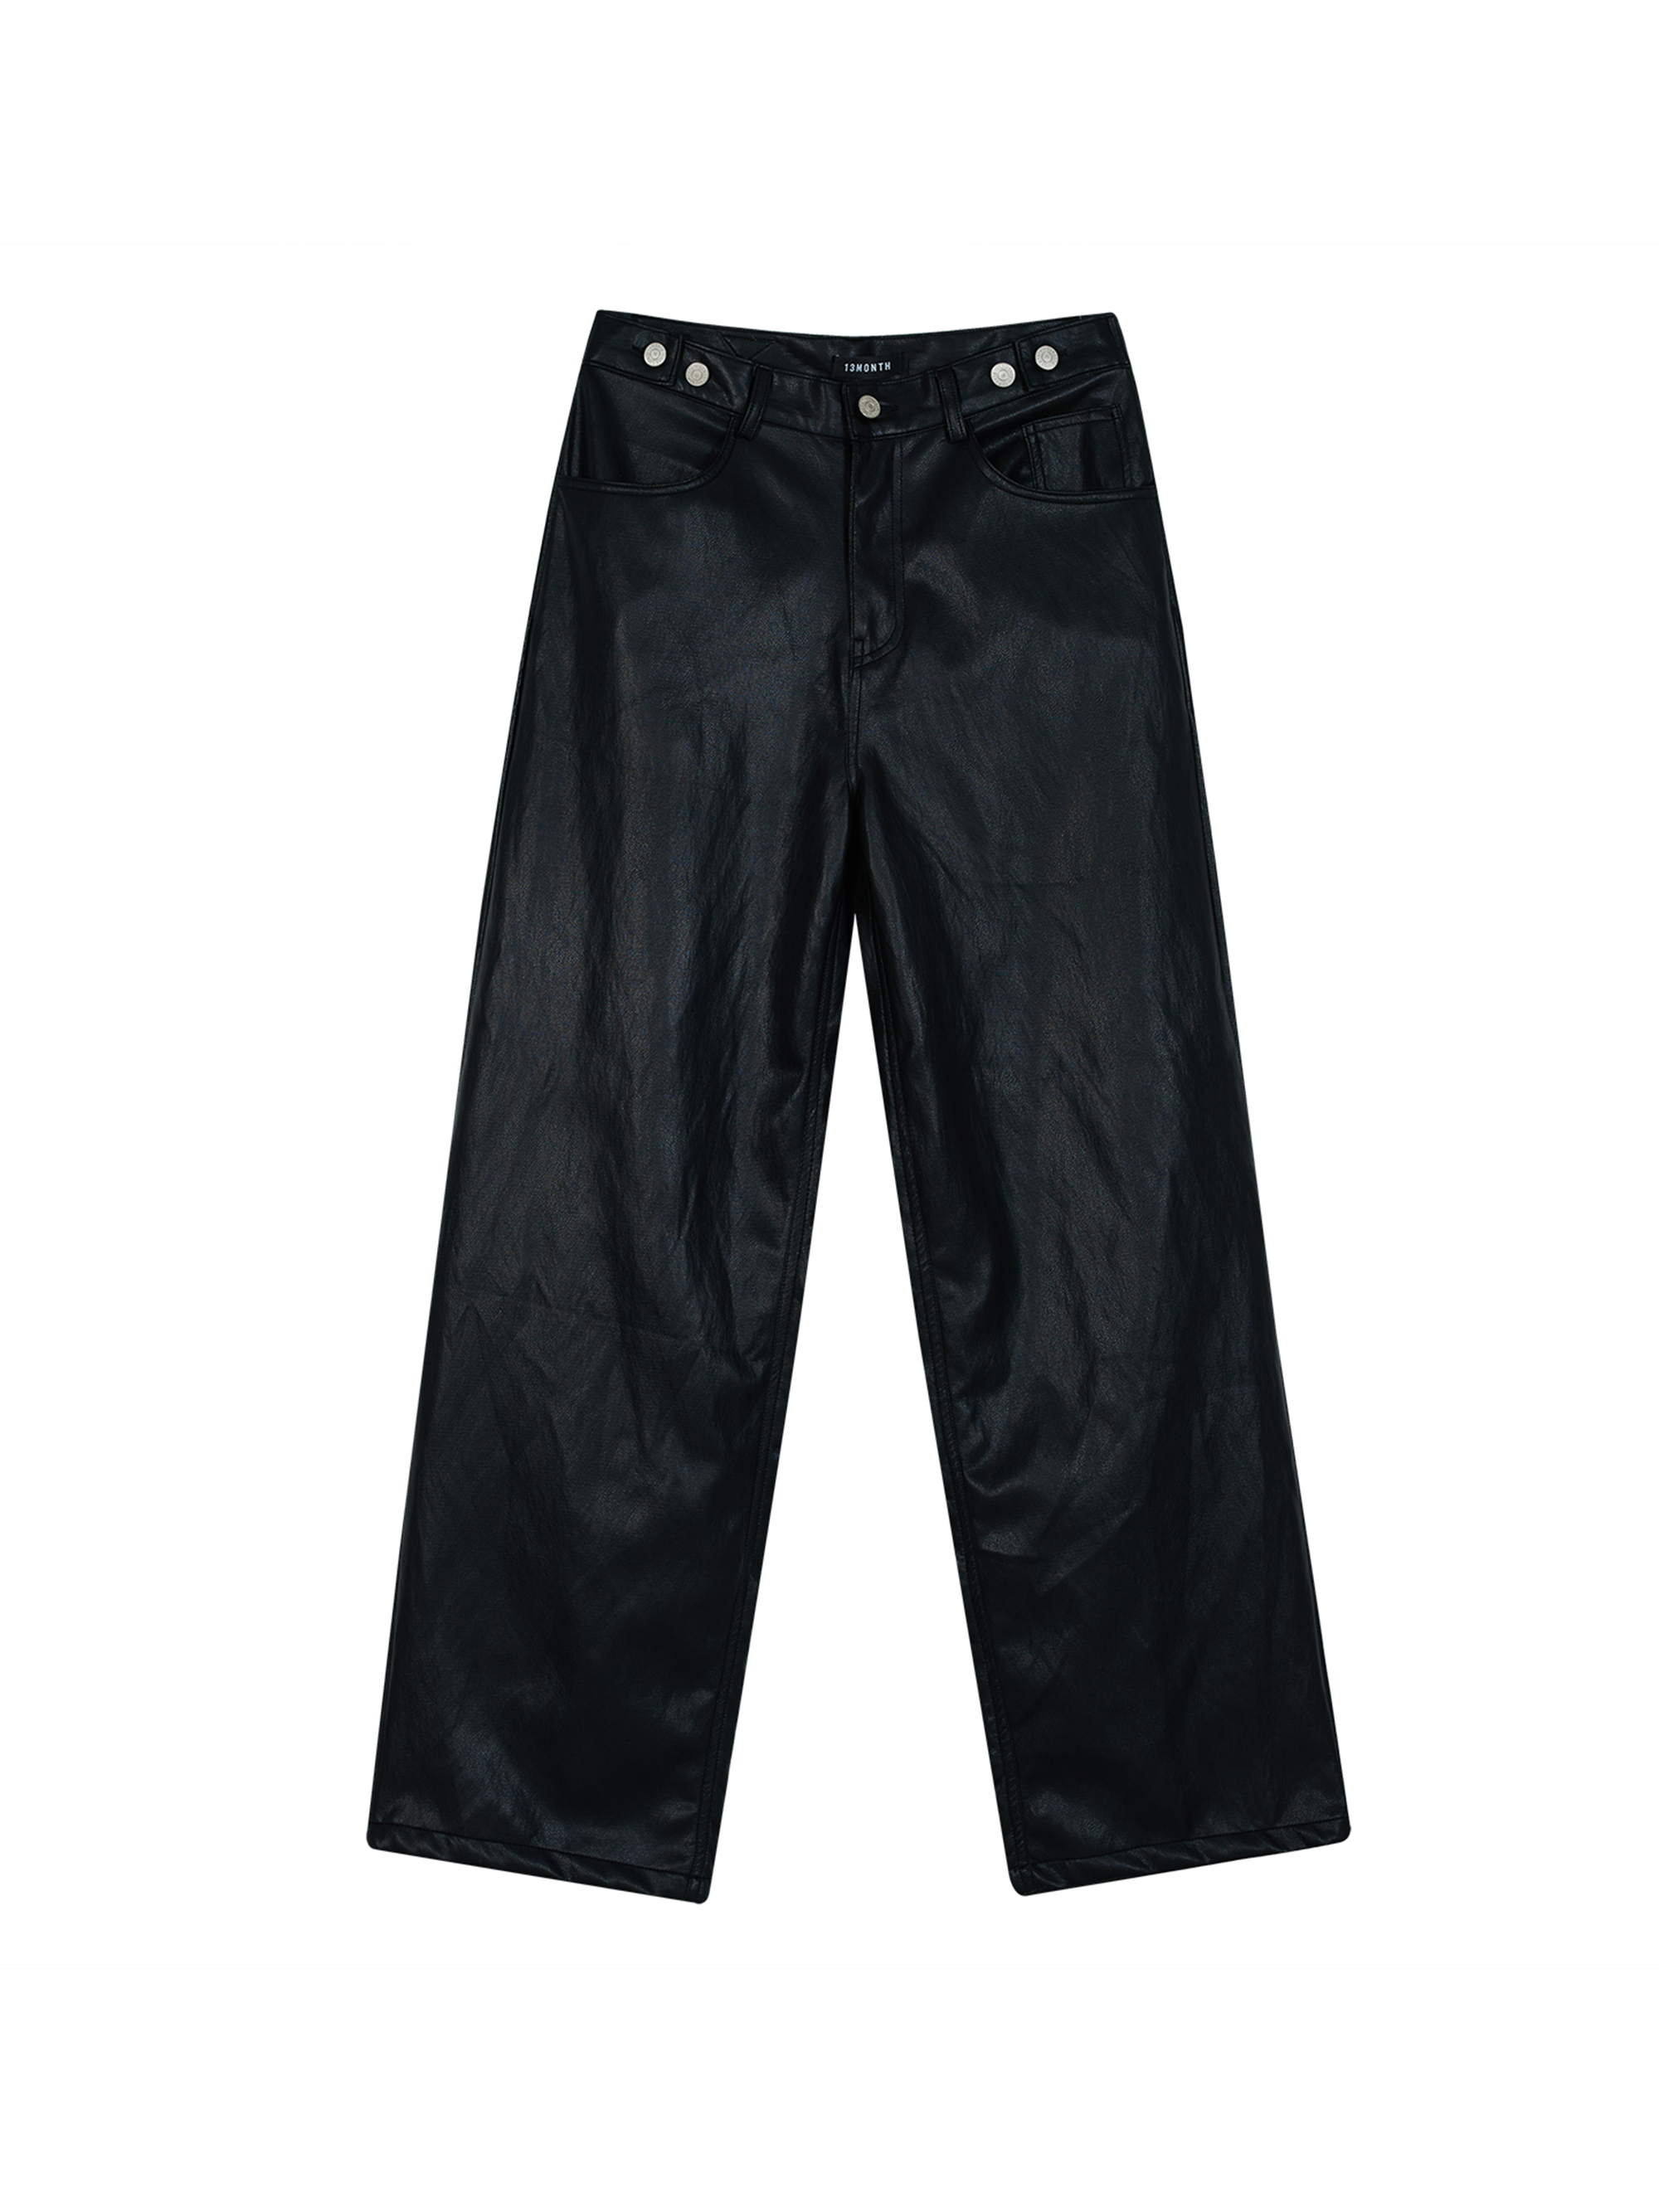 LEATHER WIDE PANTS (BLACK)